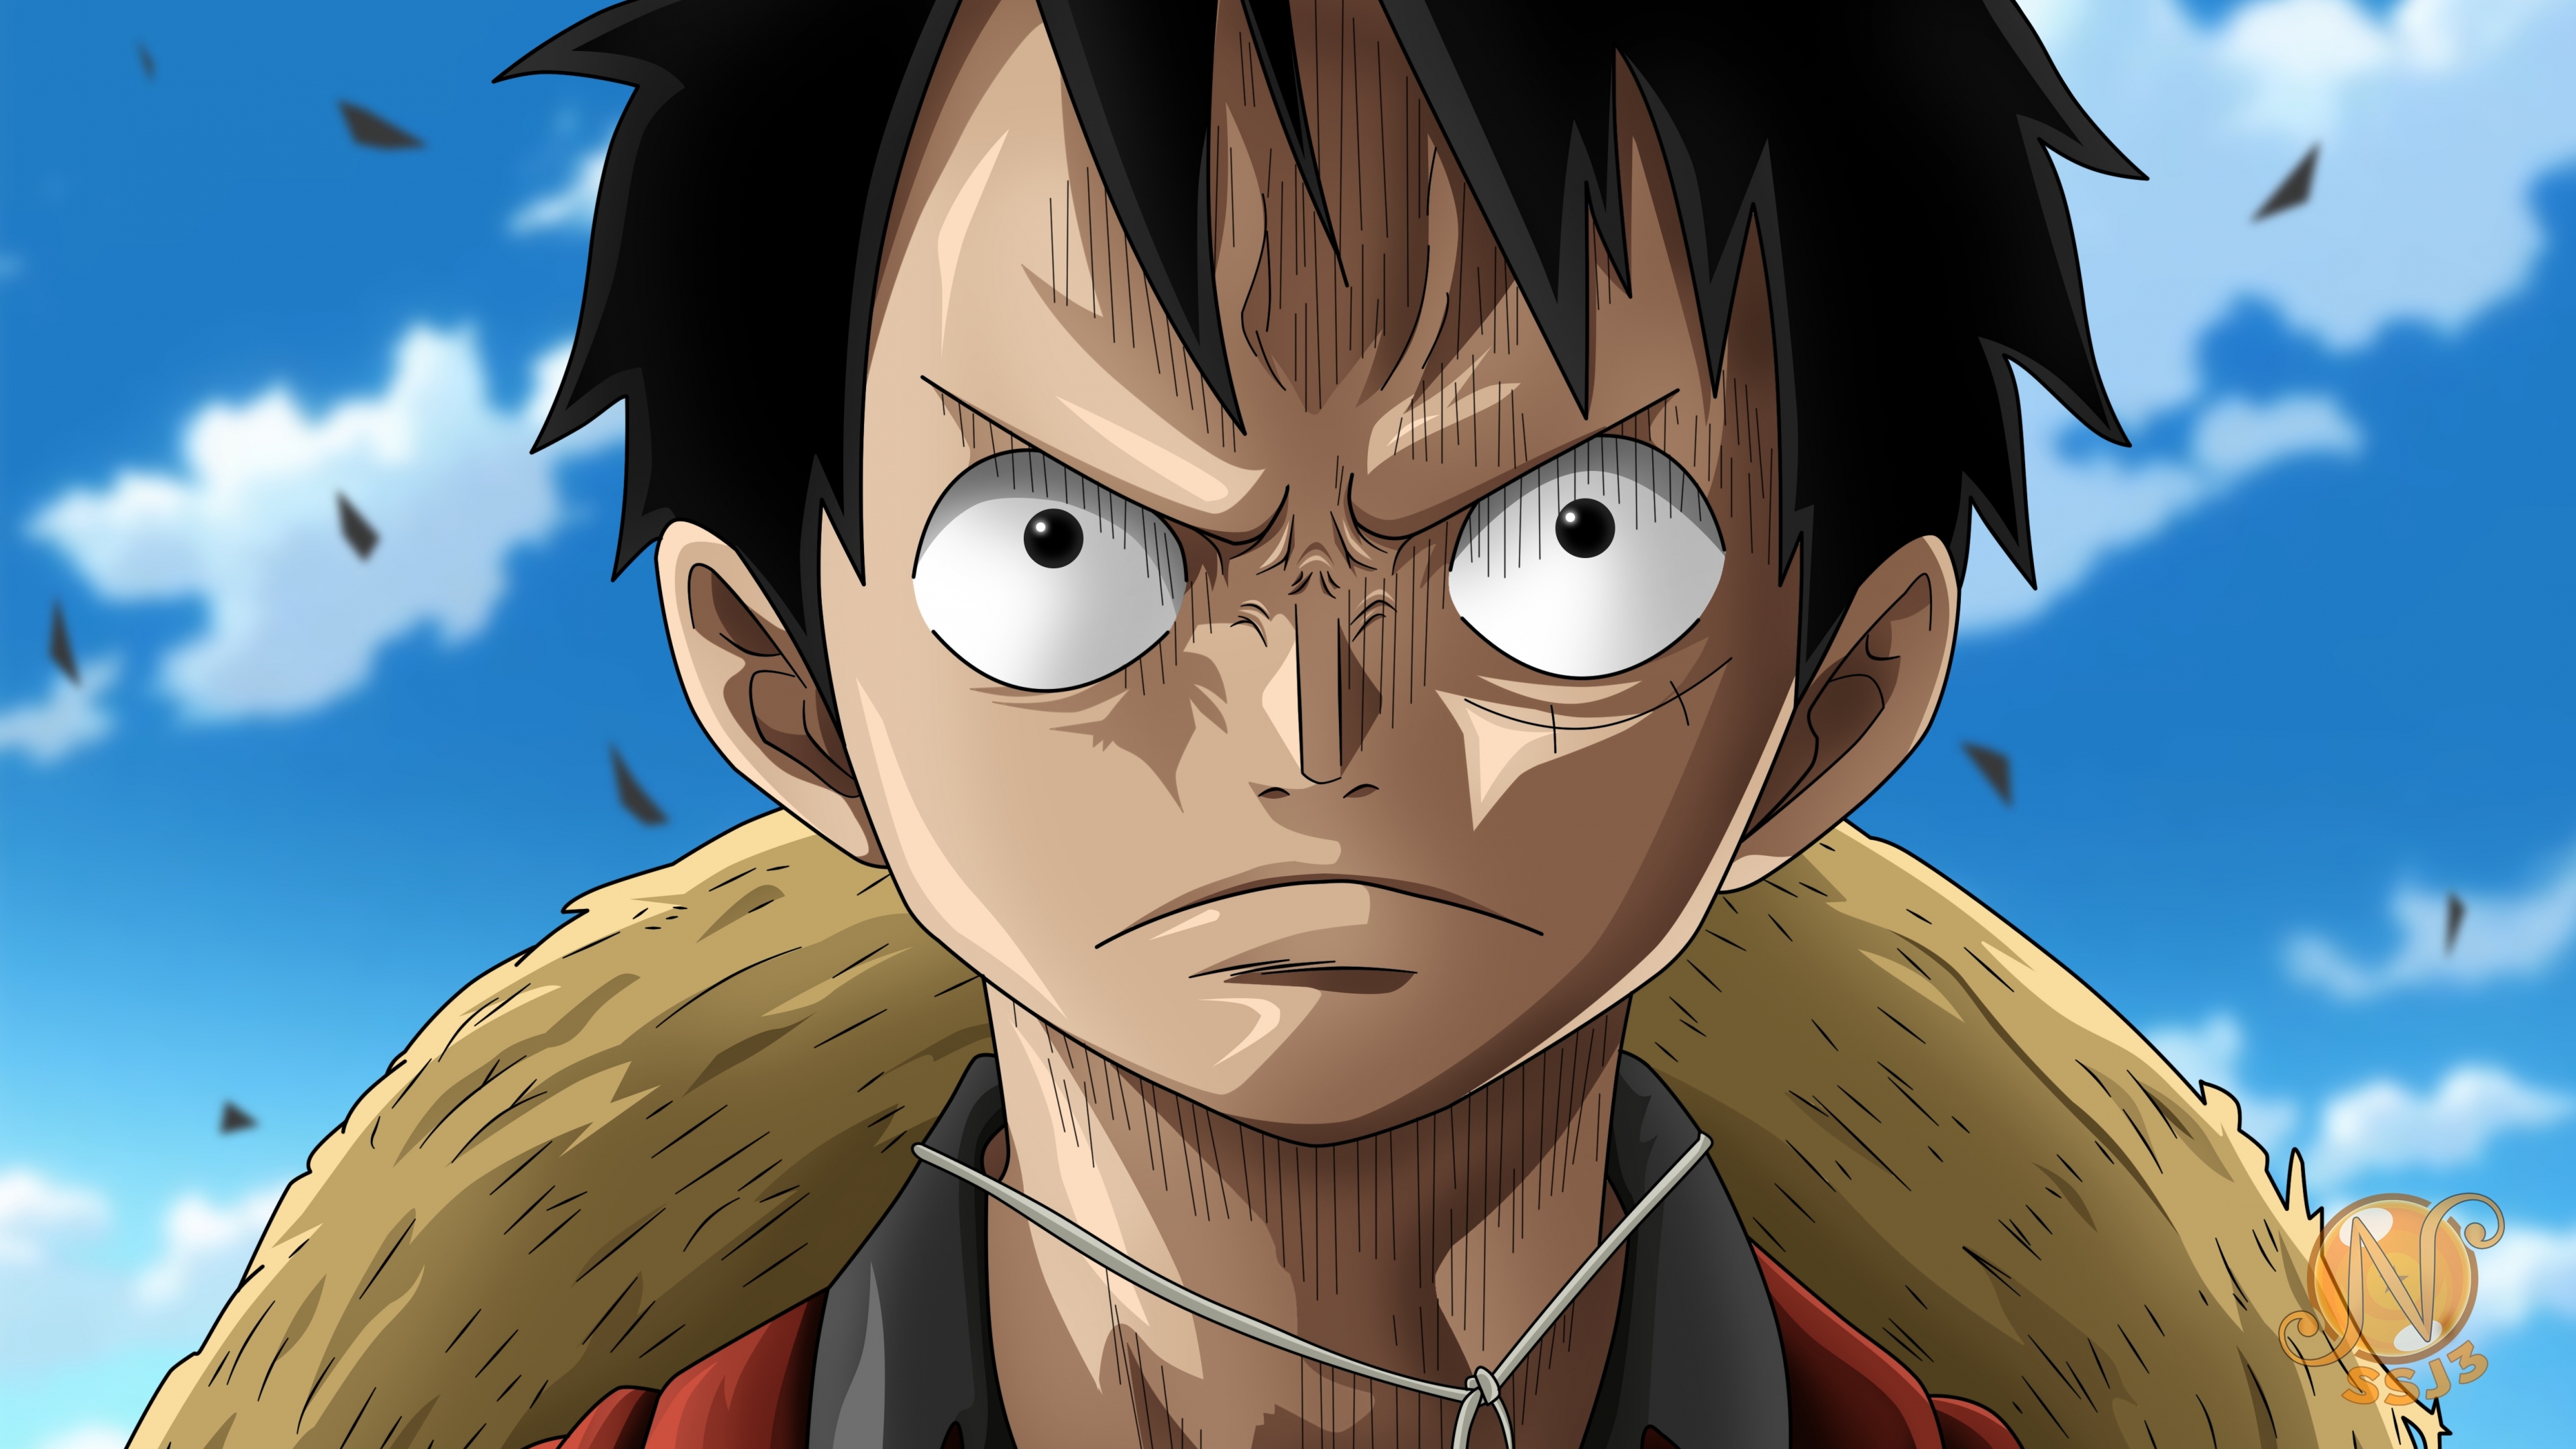 Monkey D. Luffy Wallpapers